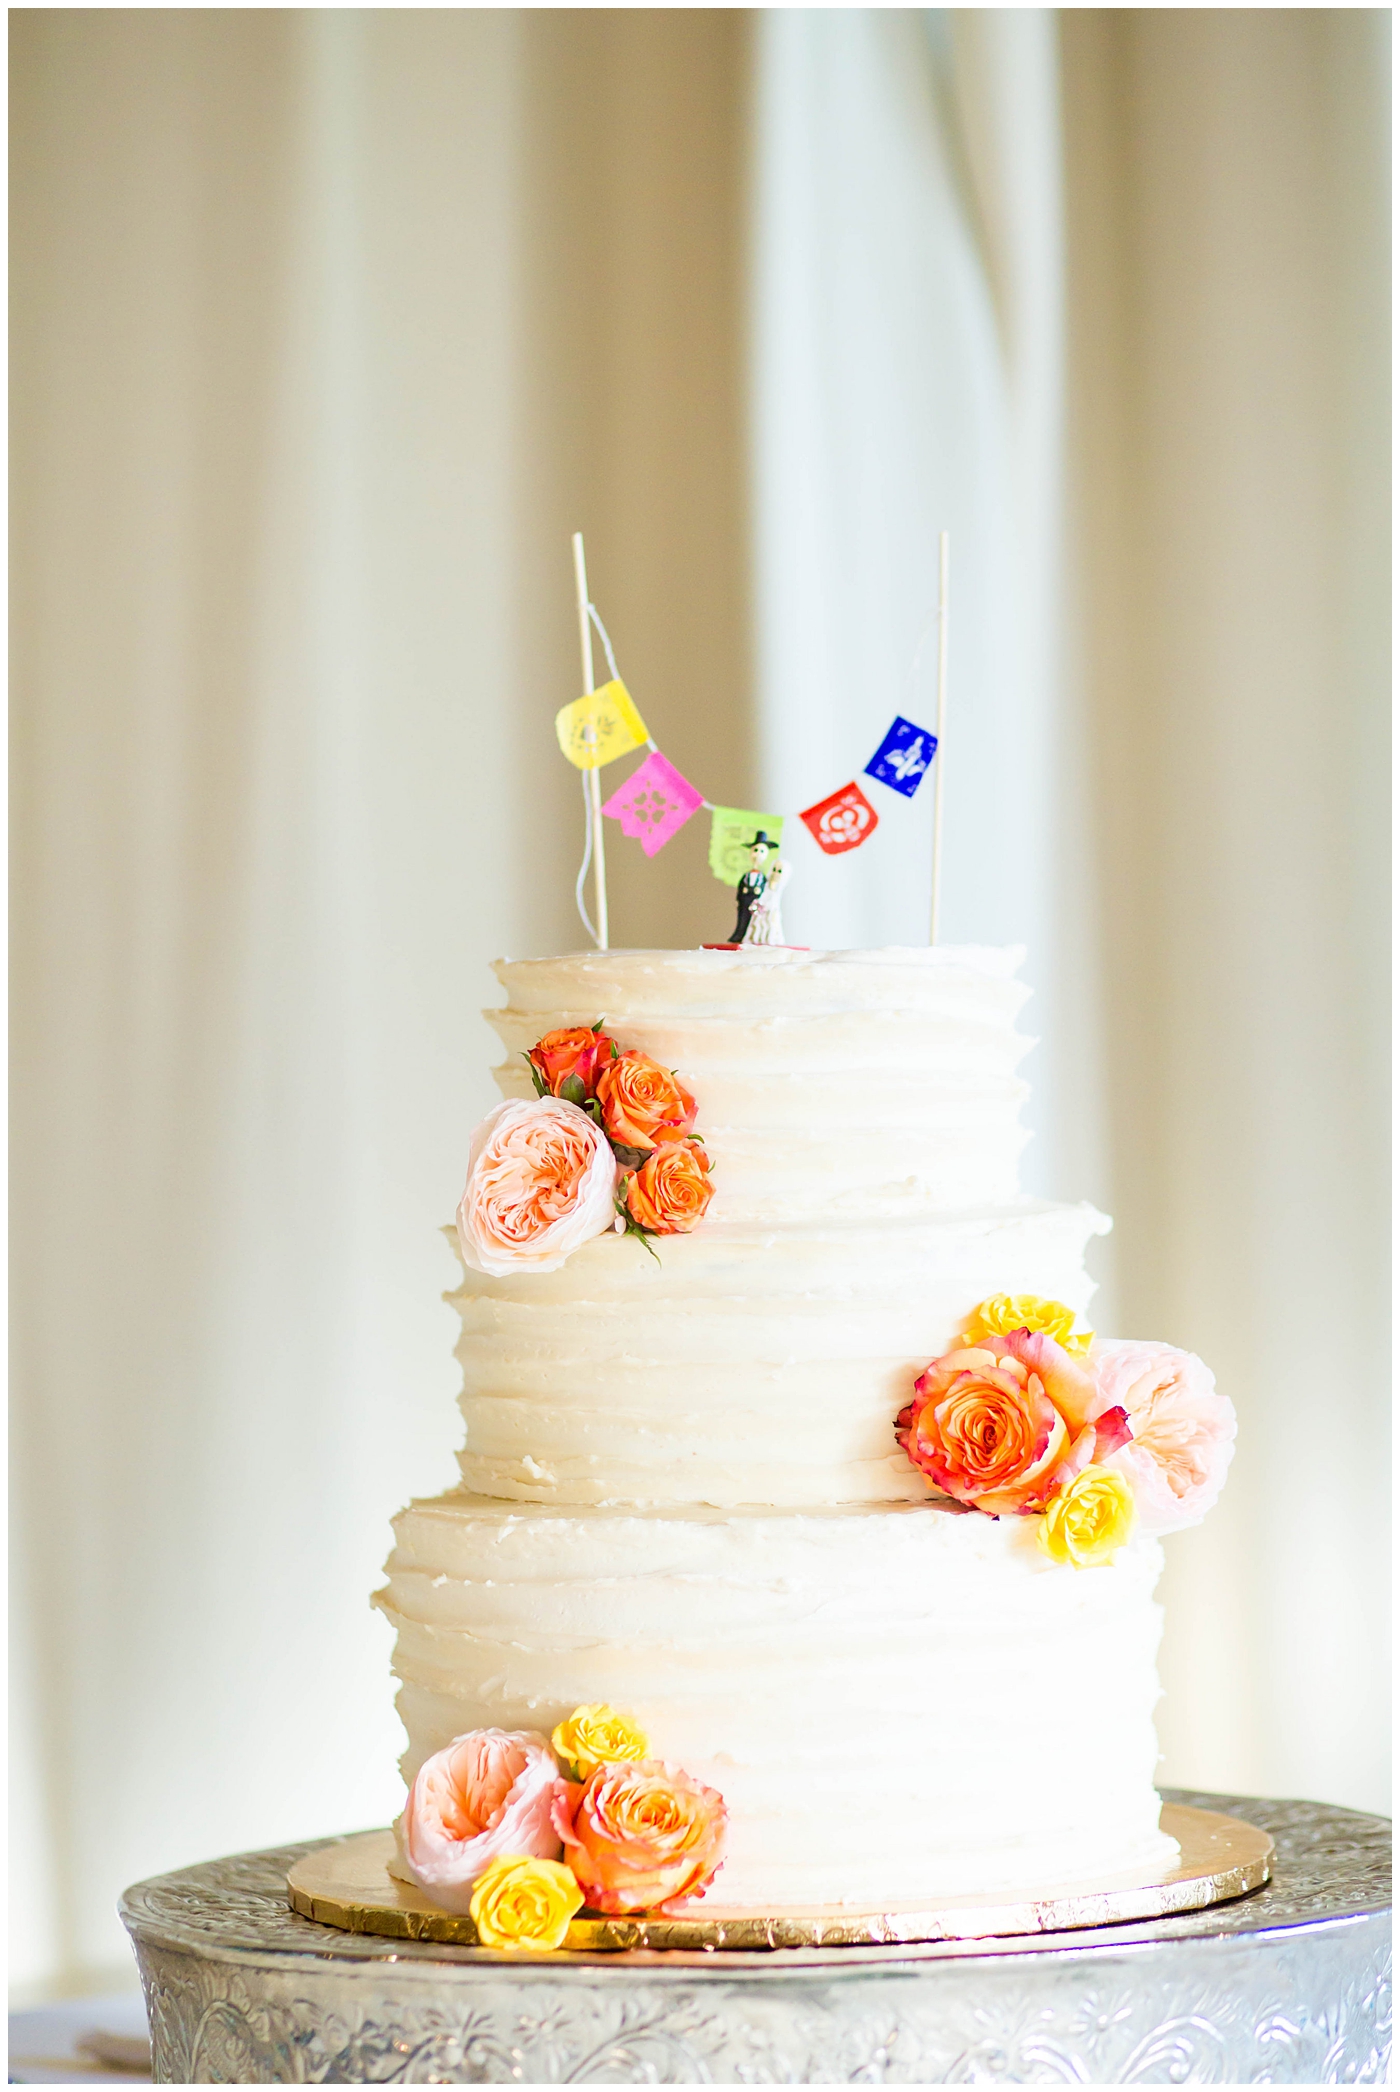 white wedding cake with bright orange flowers and dia de los muertos mr. and mrs. statue cake topper